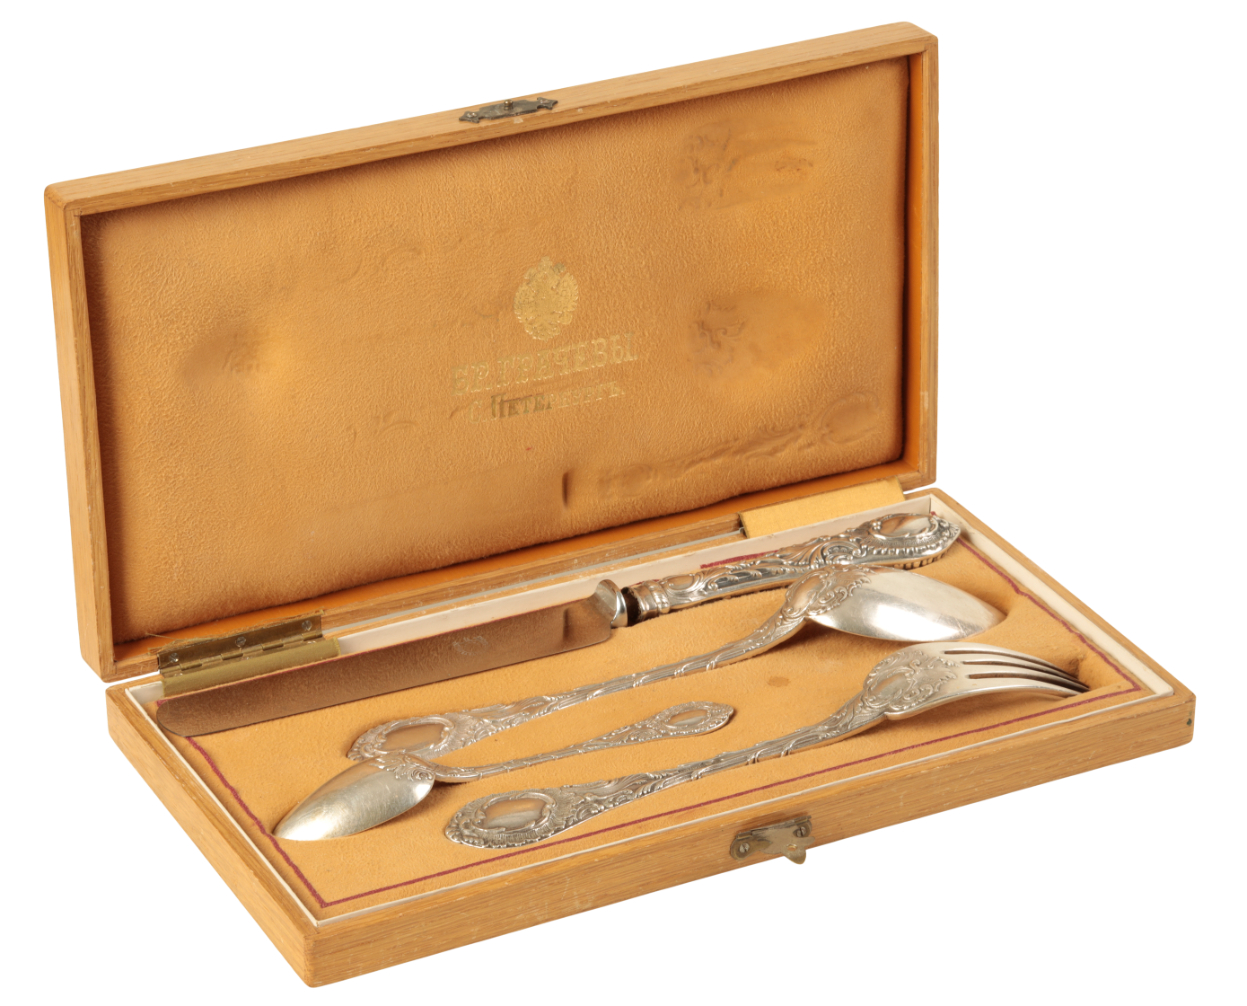 A TRAVELLING CUTLERY SET BY GRACHEV